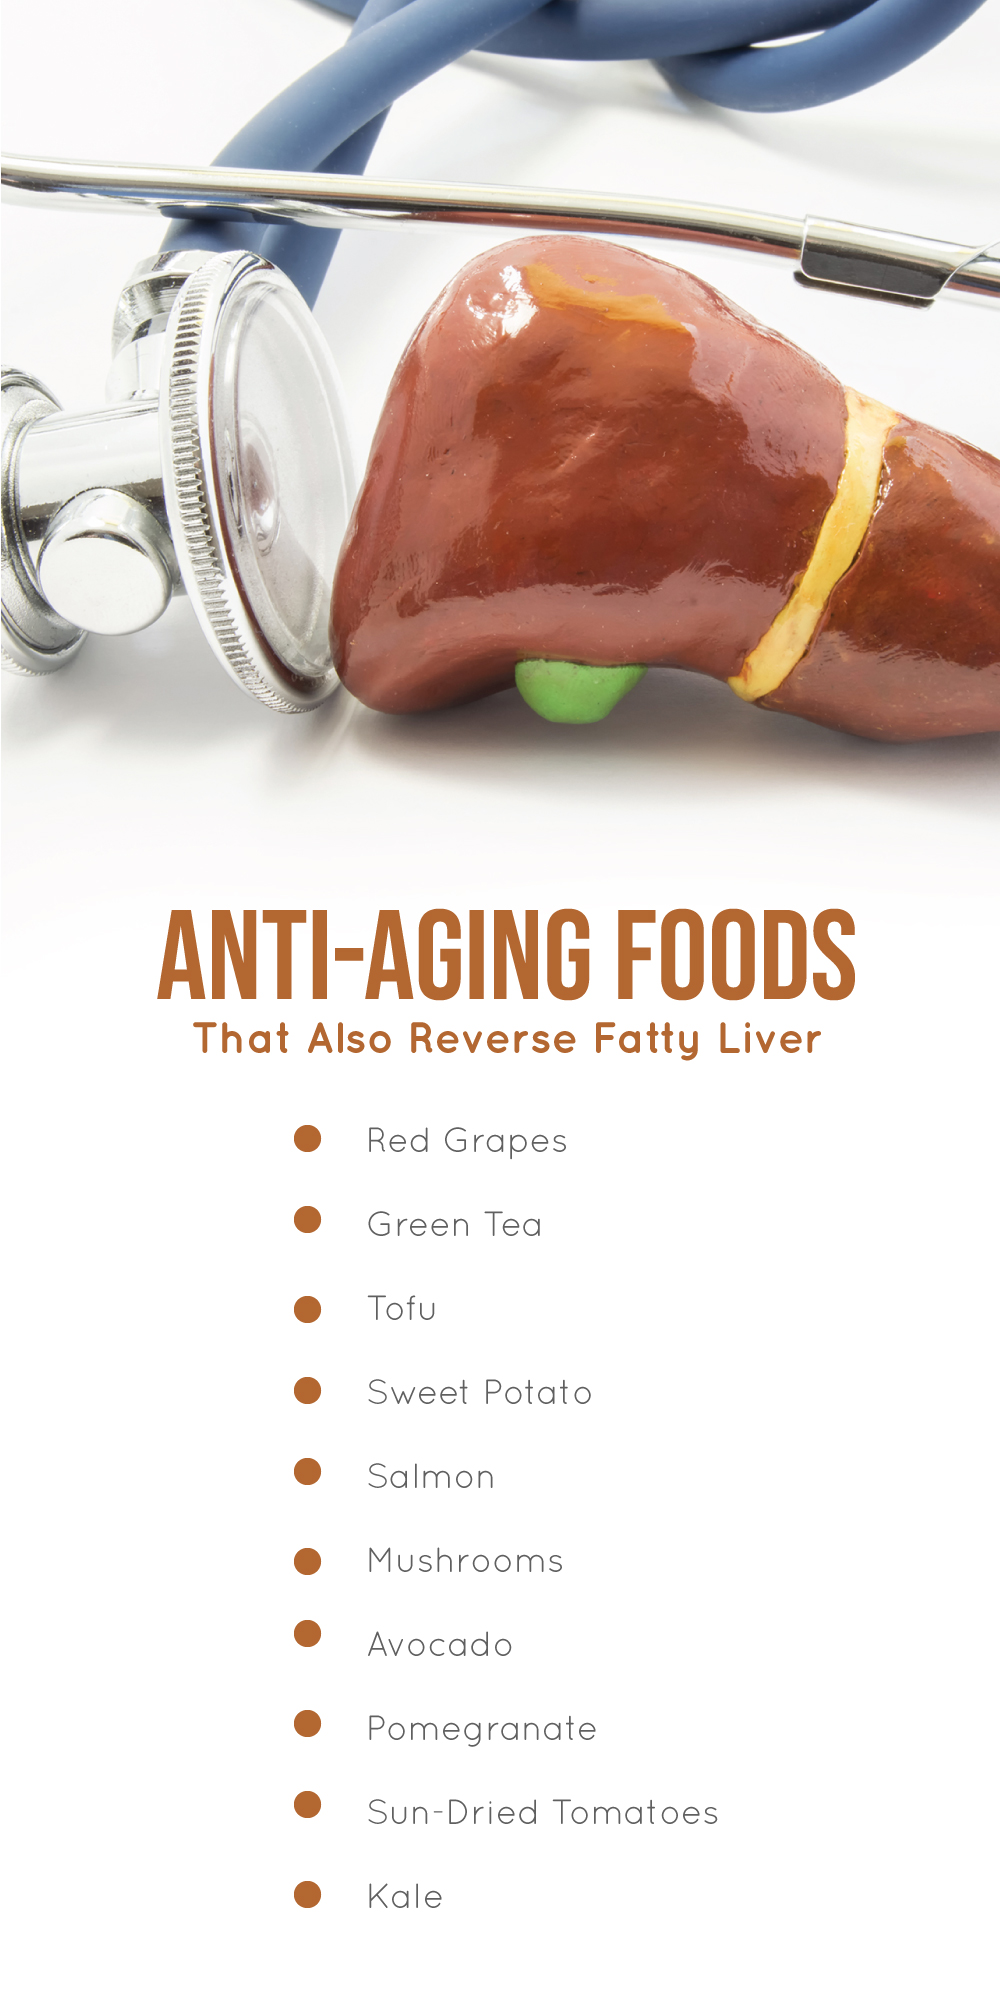 Anti-Aging Foods That Also Reverse Fatty Liver